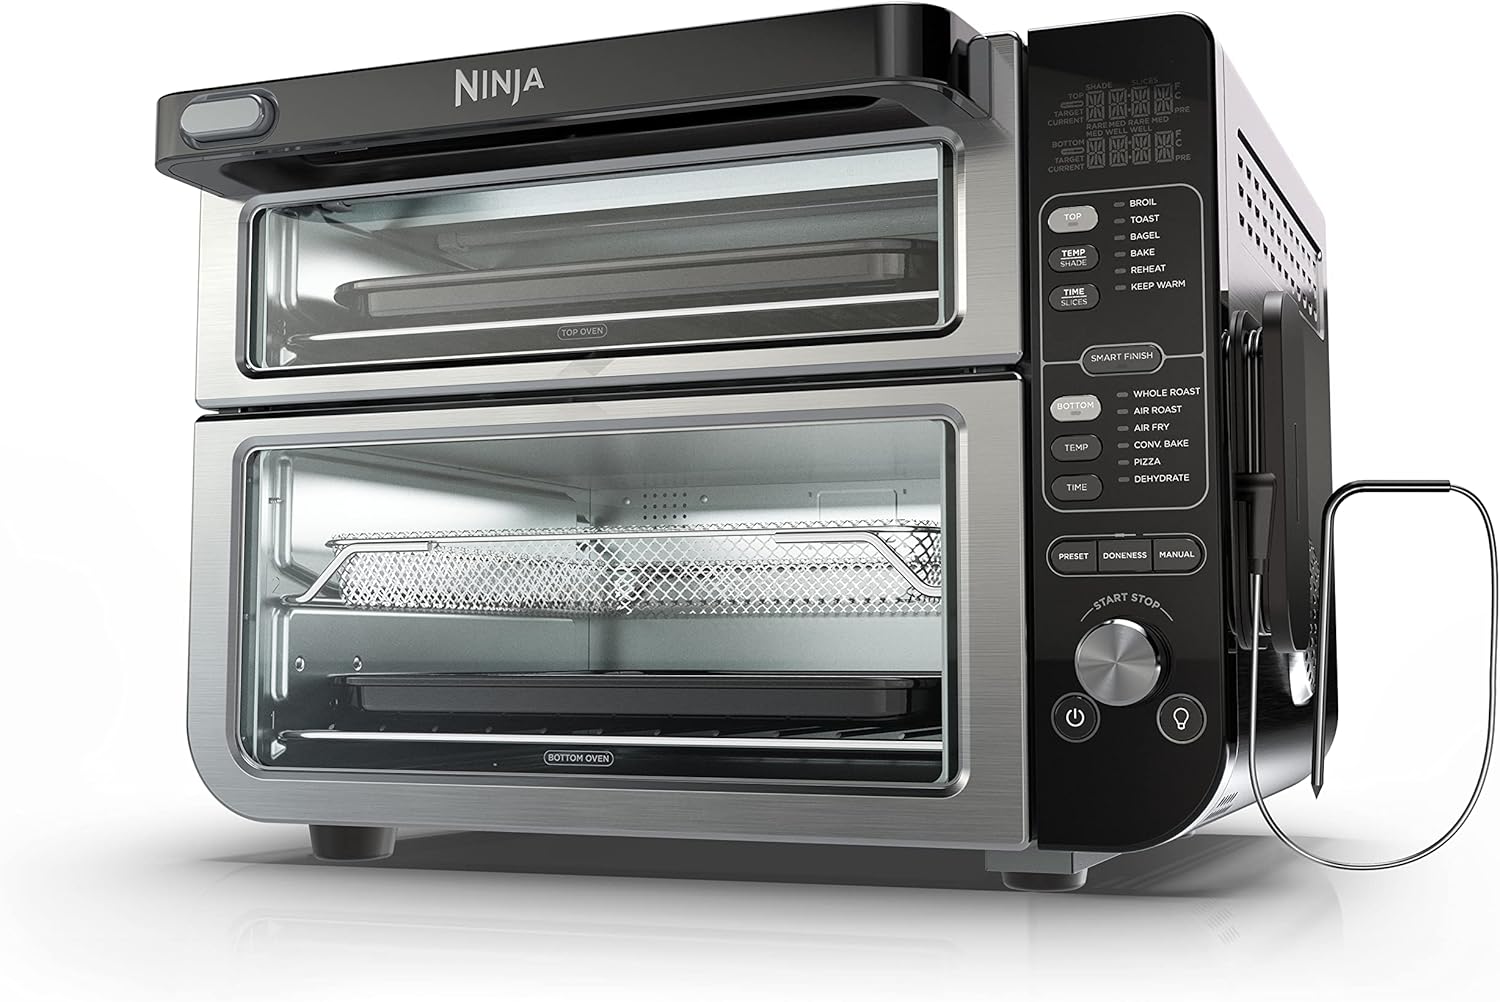 Ninja R-DCT451 12-in-1 Smart FlexDoor, Thermometer, Convection and Air Fry Double Oven, Stainless Steel - Certified Refurbished